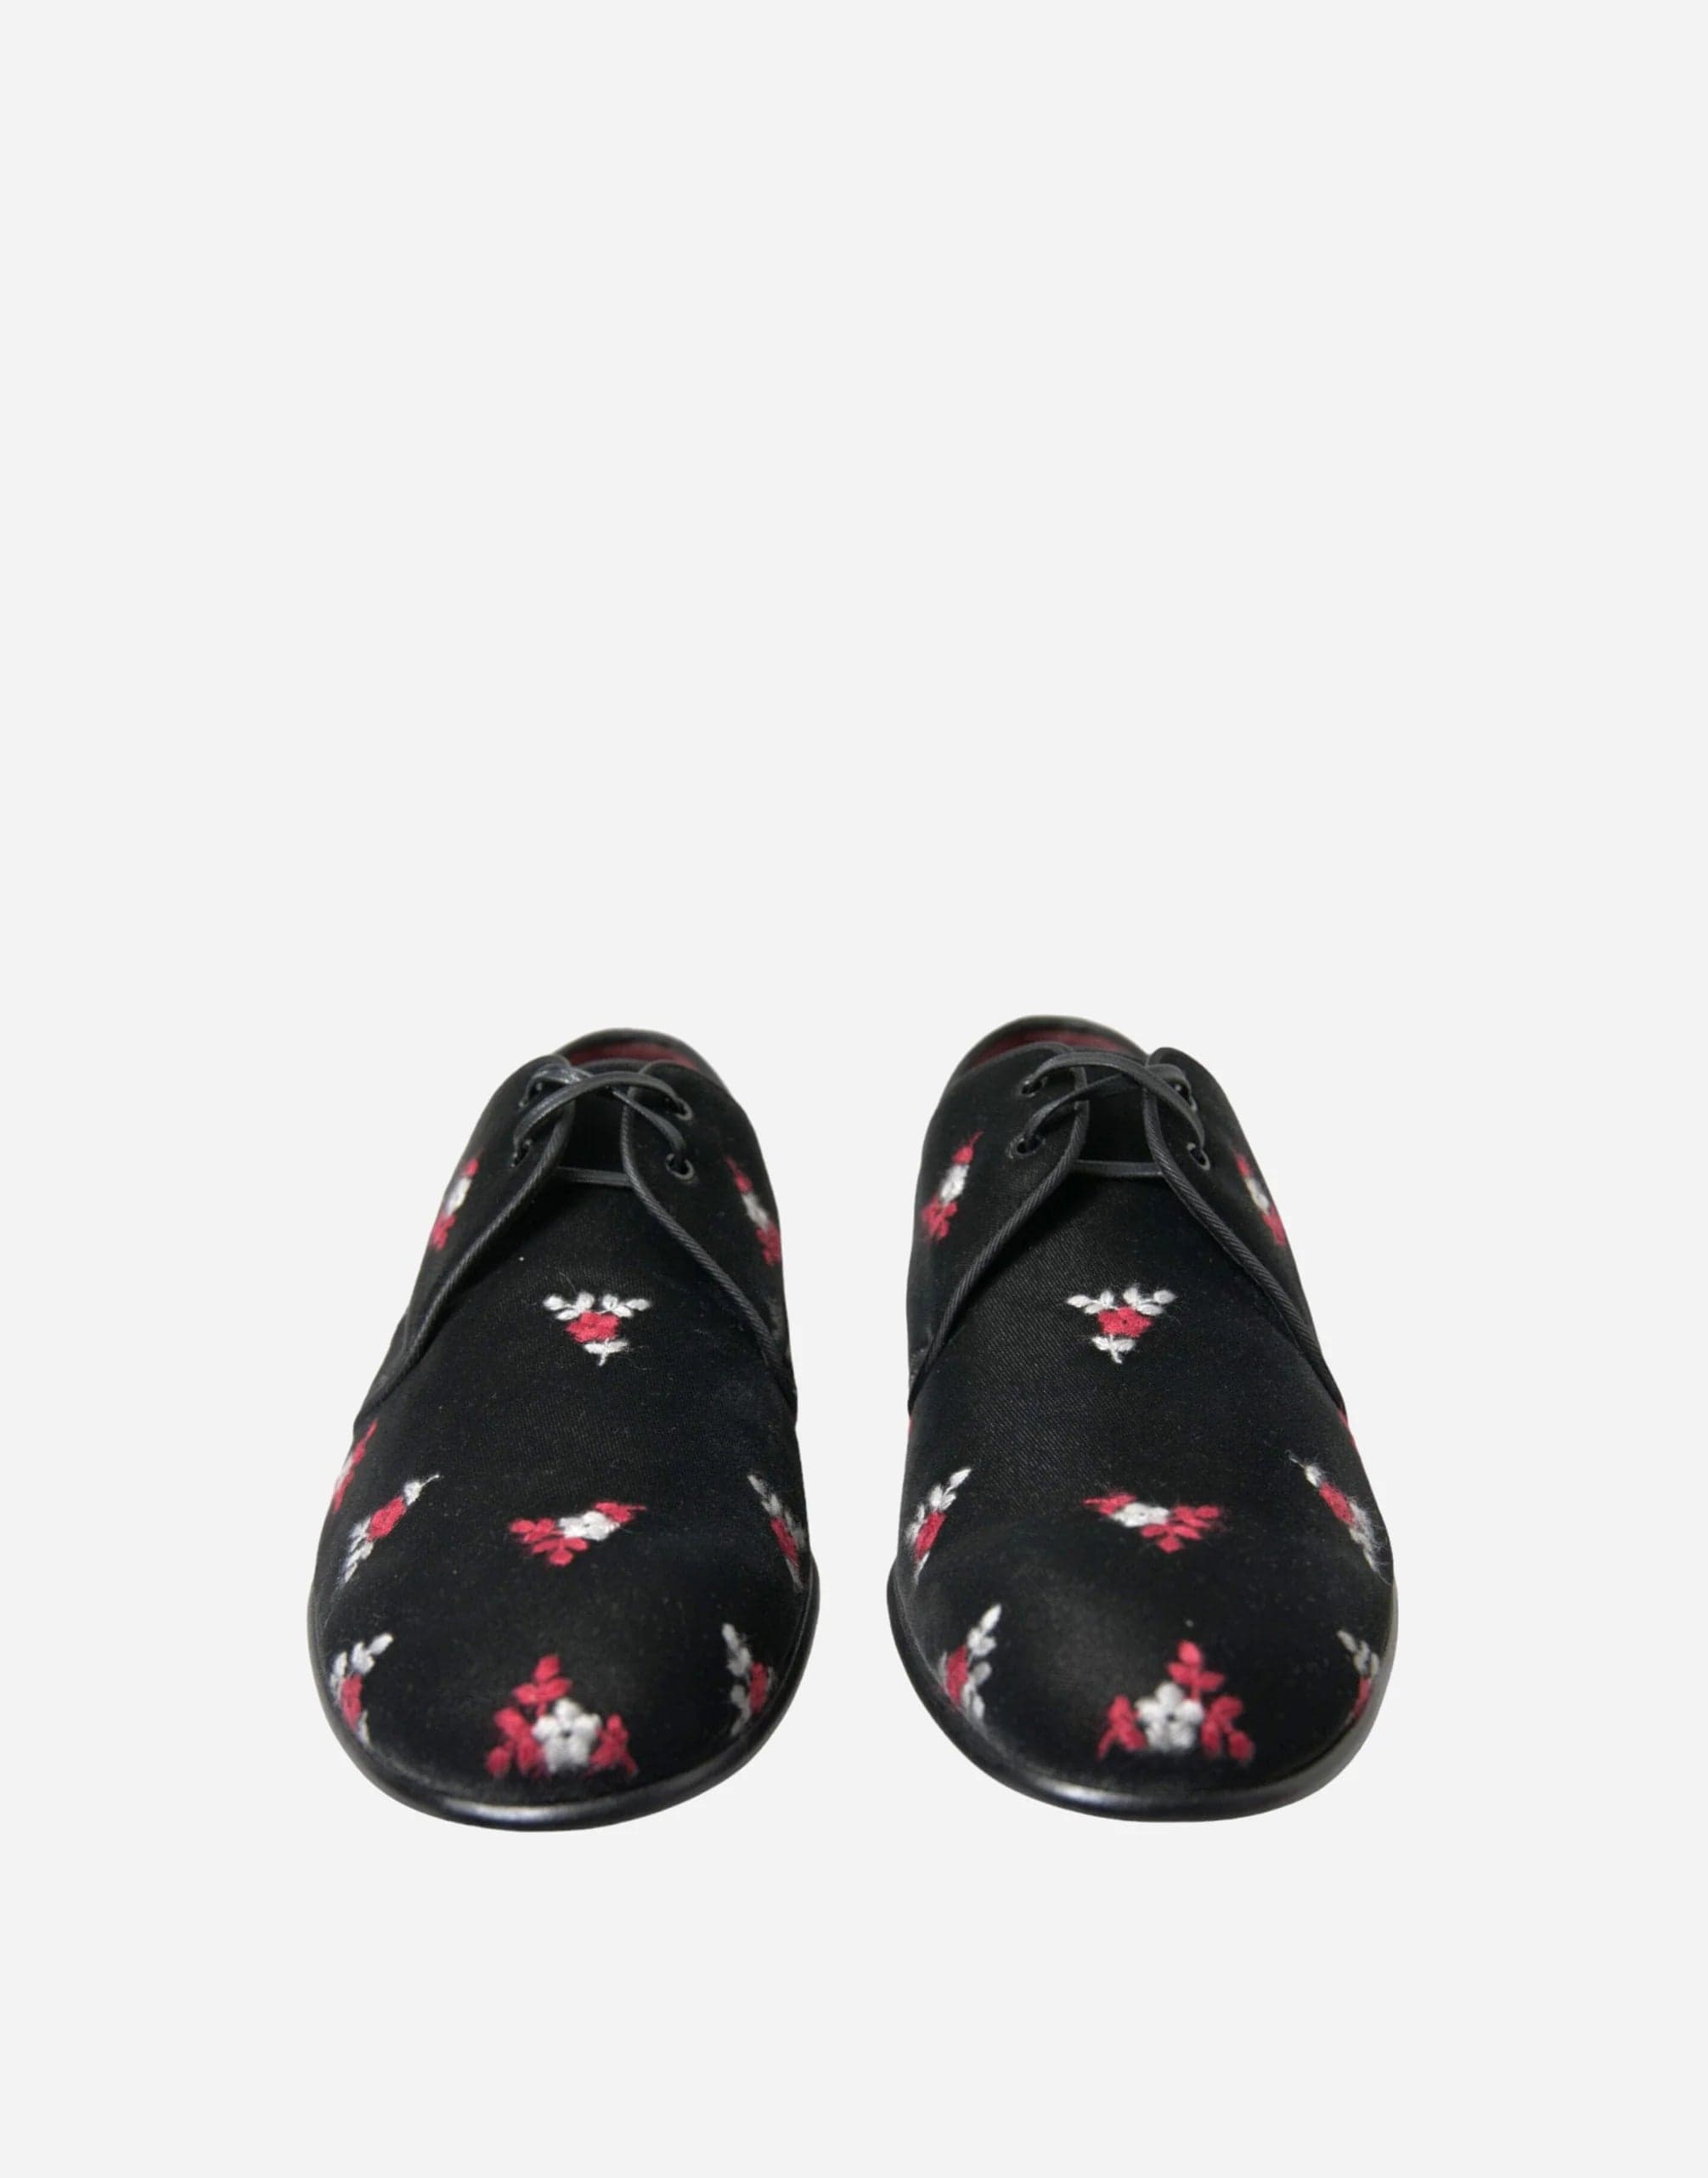 Dolce & Gabbana Floral Embroidery Dress Shoes